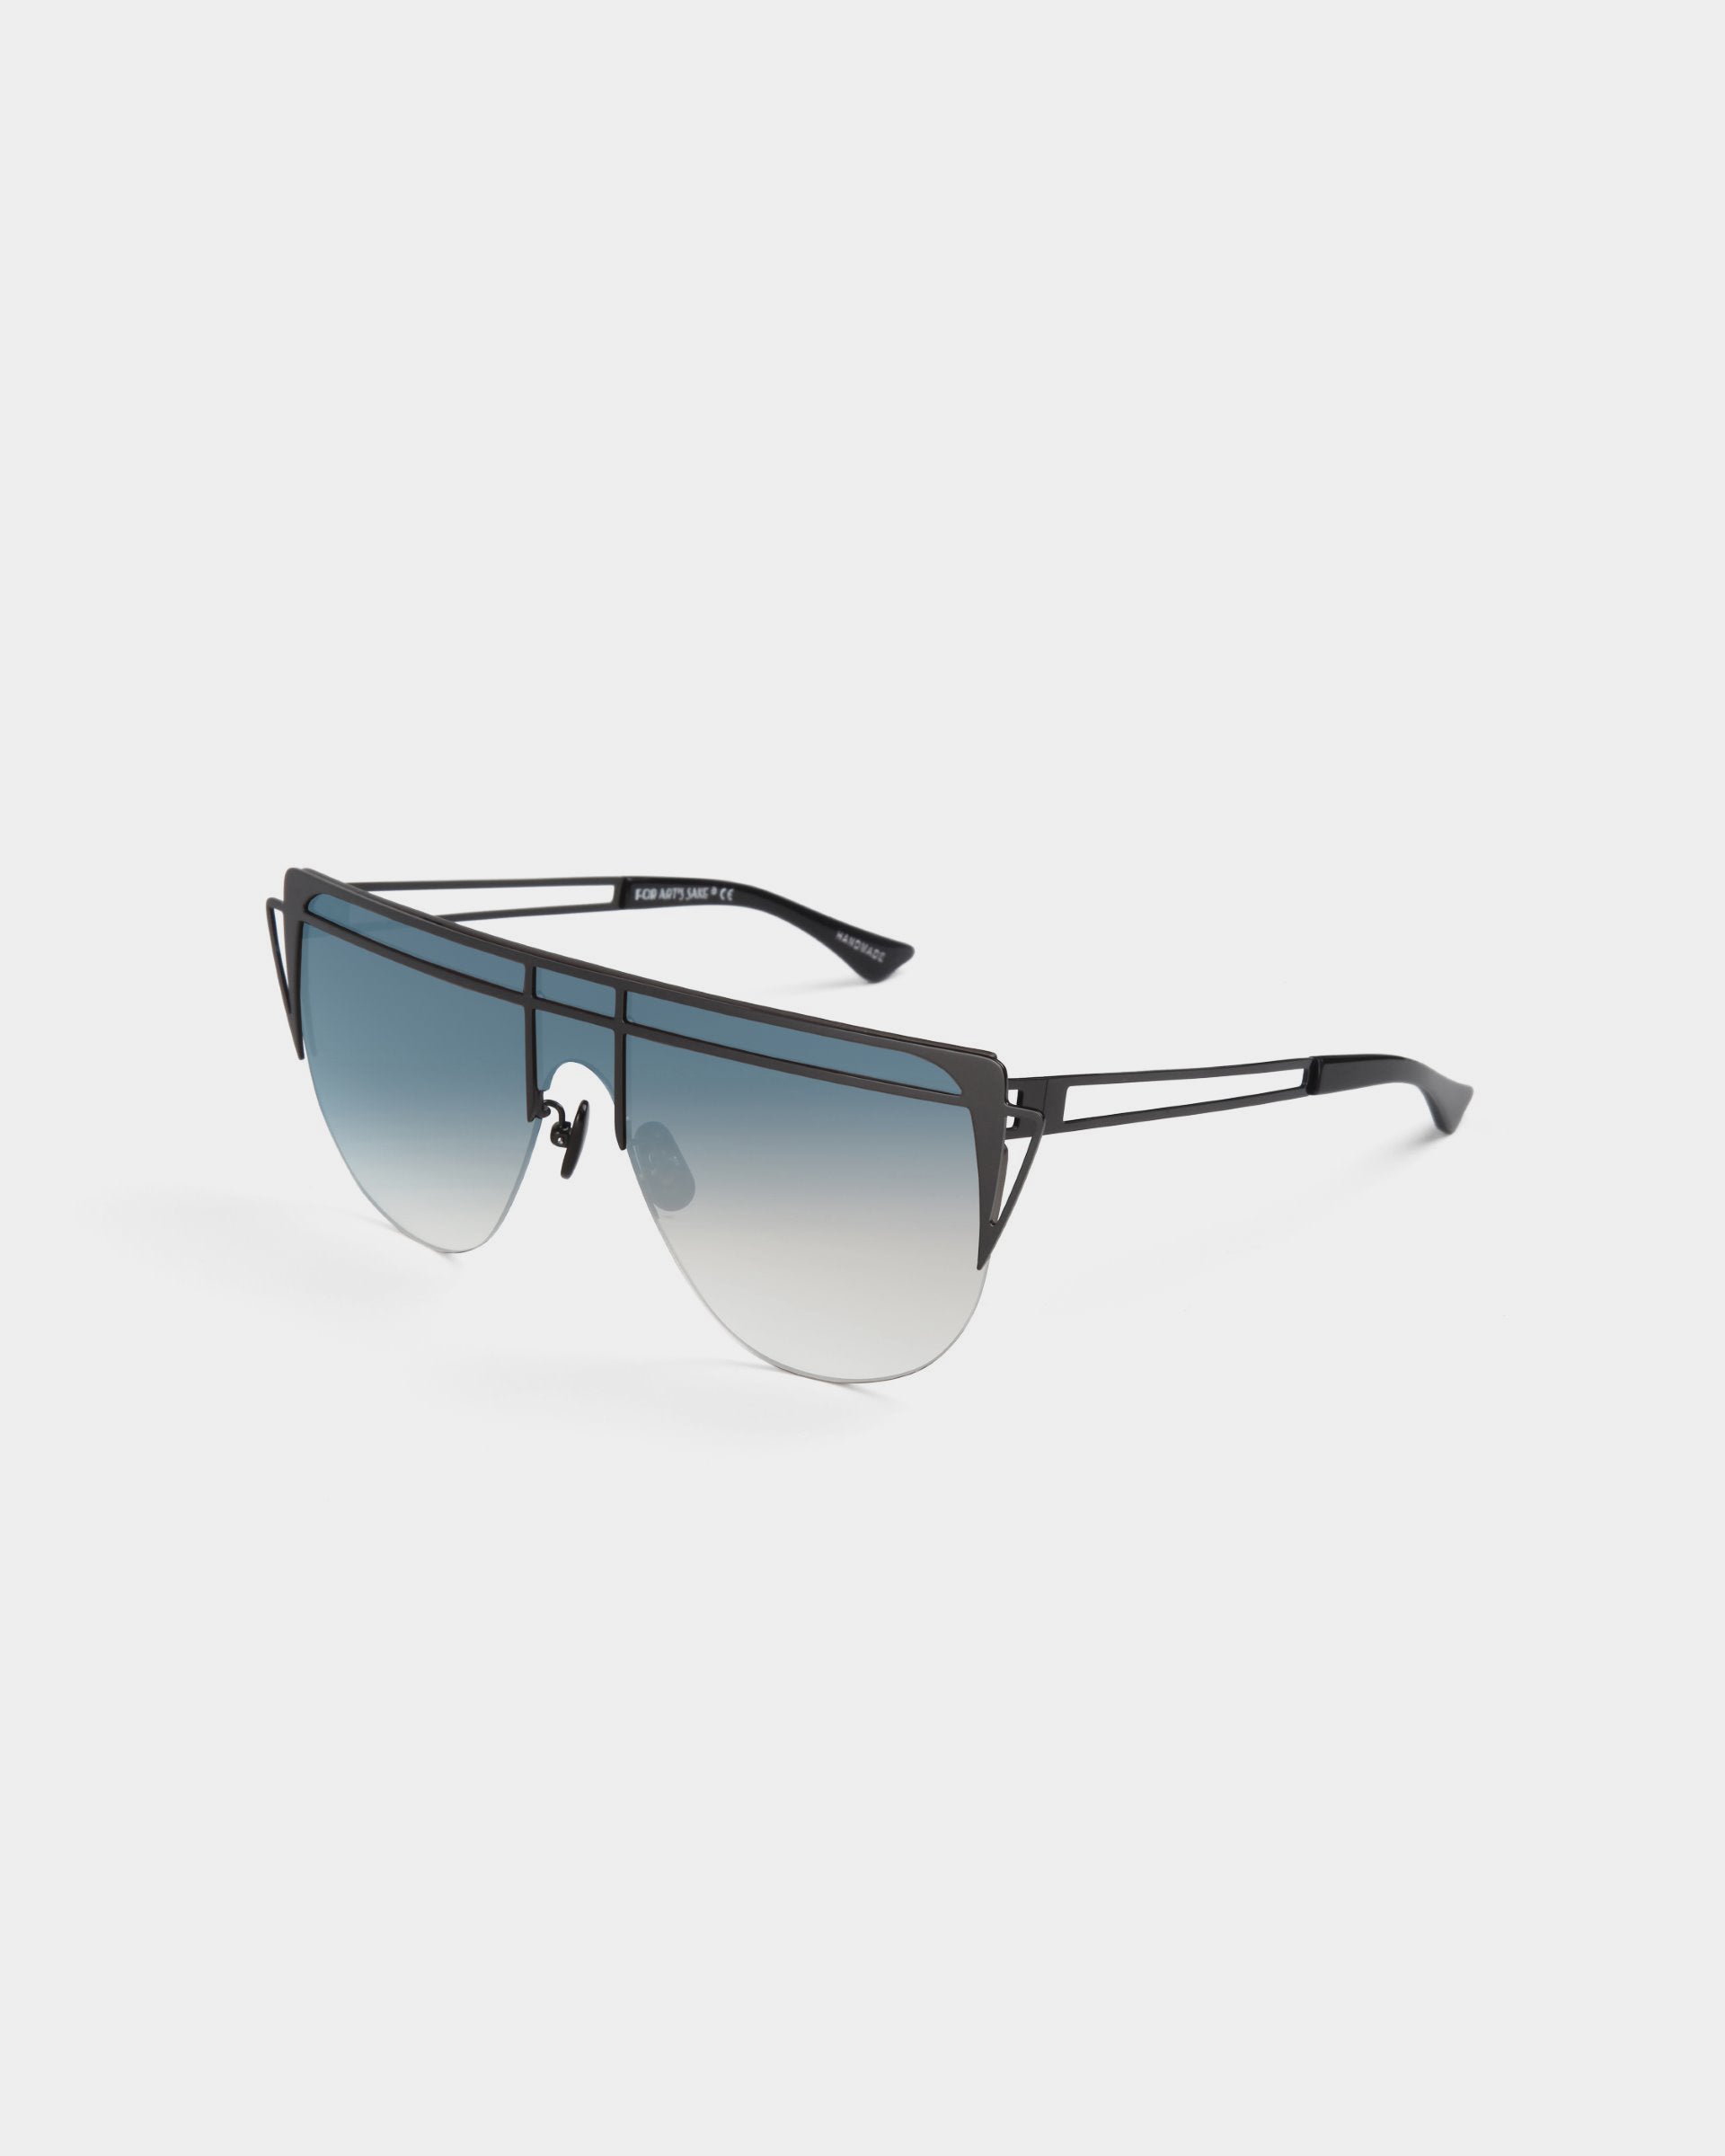 A pair of Alien sunglasses by For Art&#39;s Sake® features a sleek black metal frame and a double-bridge design. The gradient tinted lenses offer UV protection, transitioning from dark blue at the top to clear at the bottom. The temples are slender with a minimalist design, adding an extra touch of sophistication.